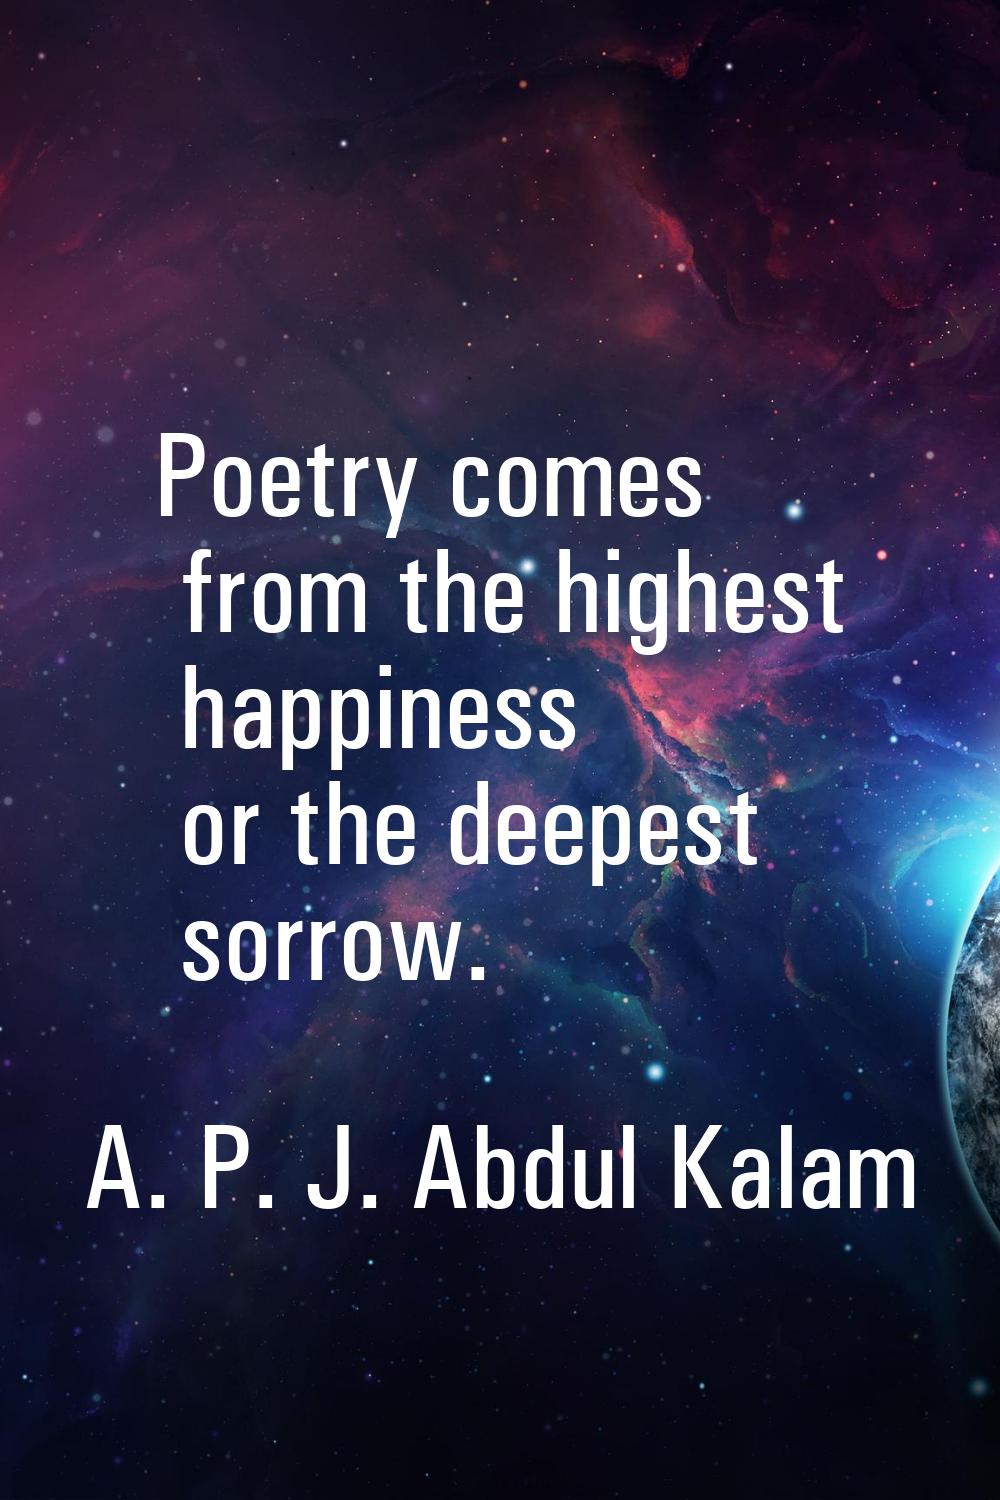 Poetry comes from the highest happiness or the deepest sorrow.